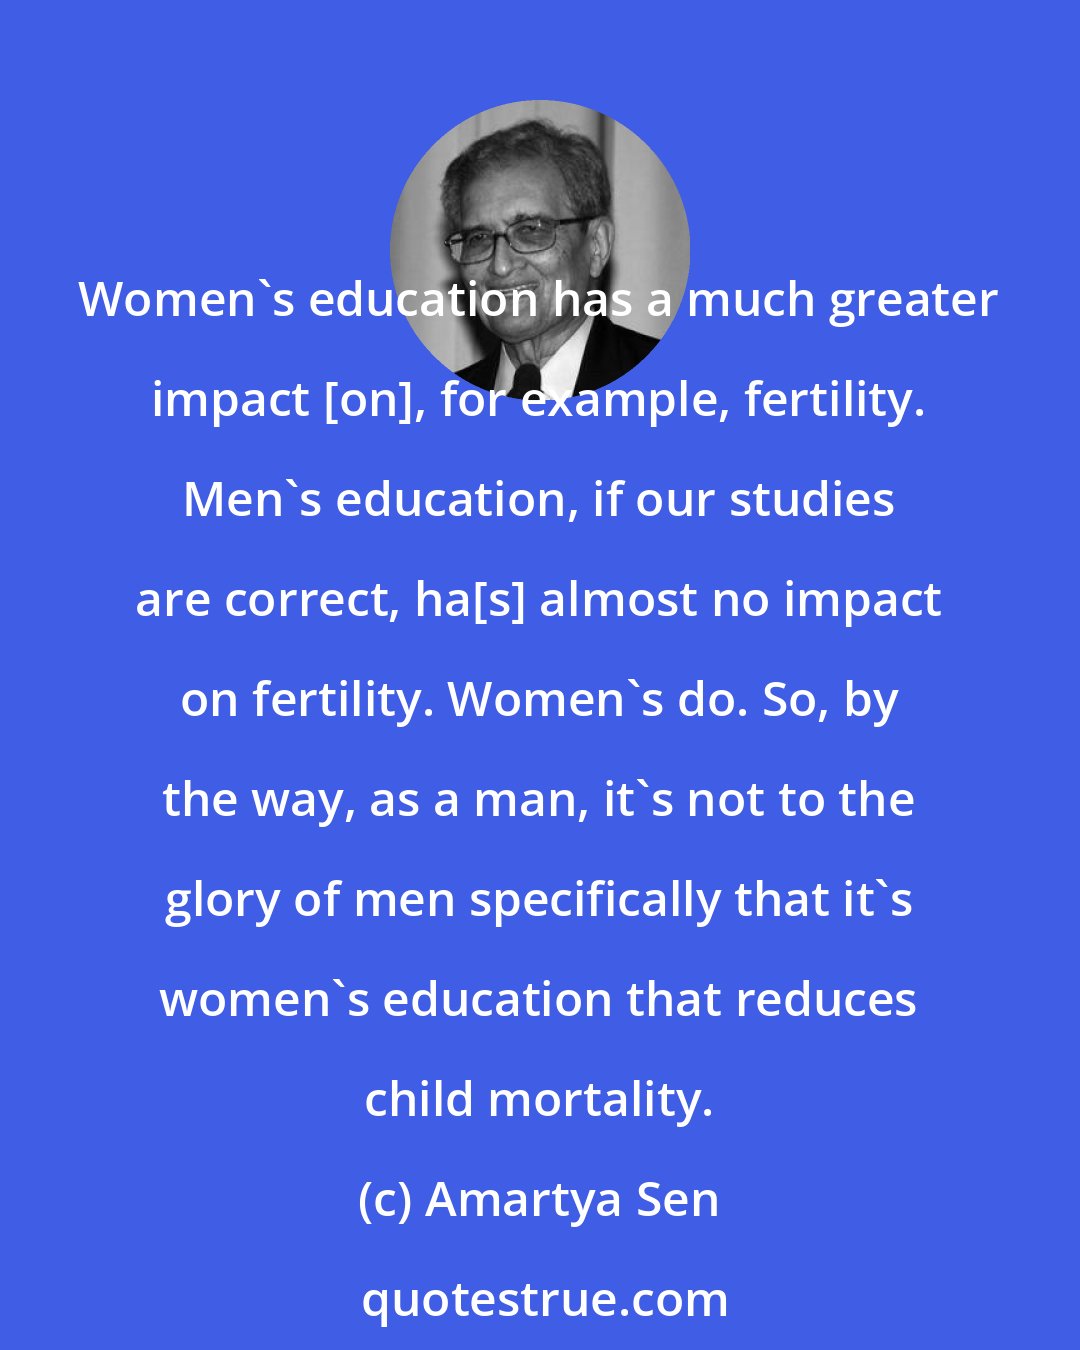 Amartya Sen: Women's education has a much greater impact [on], for example, fertility. Men's education, if our studies are correct, ha[s] almost no impact on fertility. Women's do. So, by the way, as a man, it's not to the glory of men specifically that it's women's education that reduces child mortality.